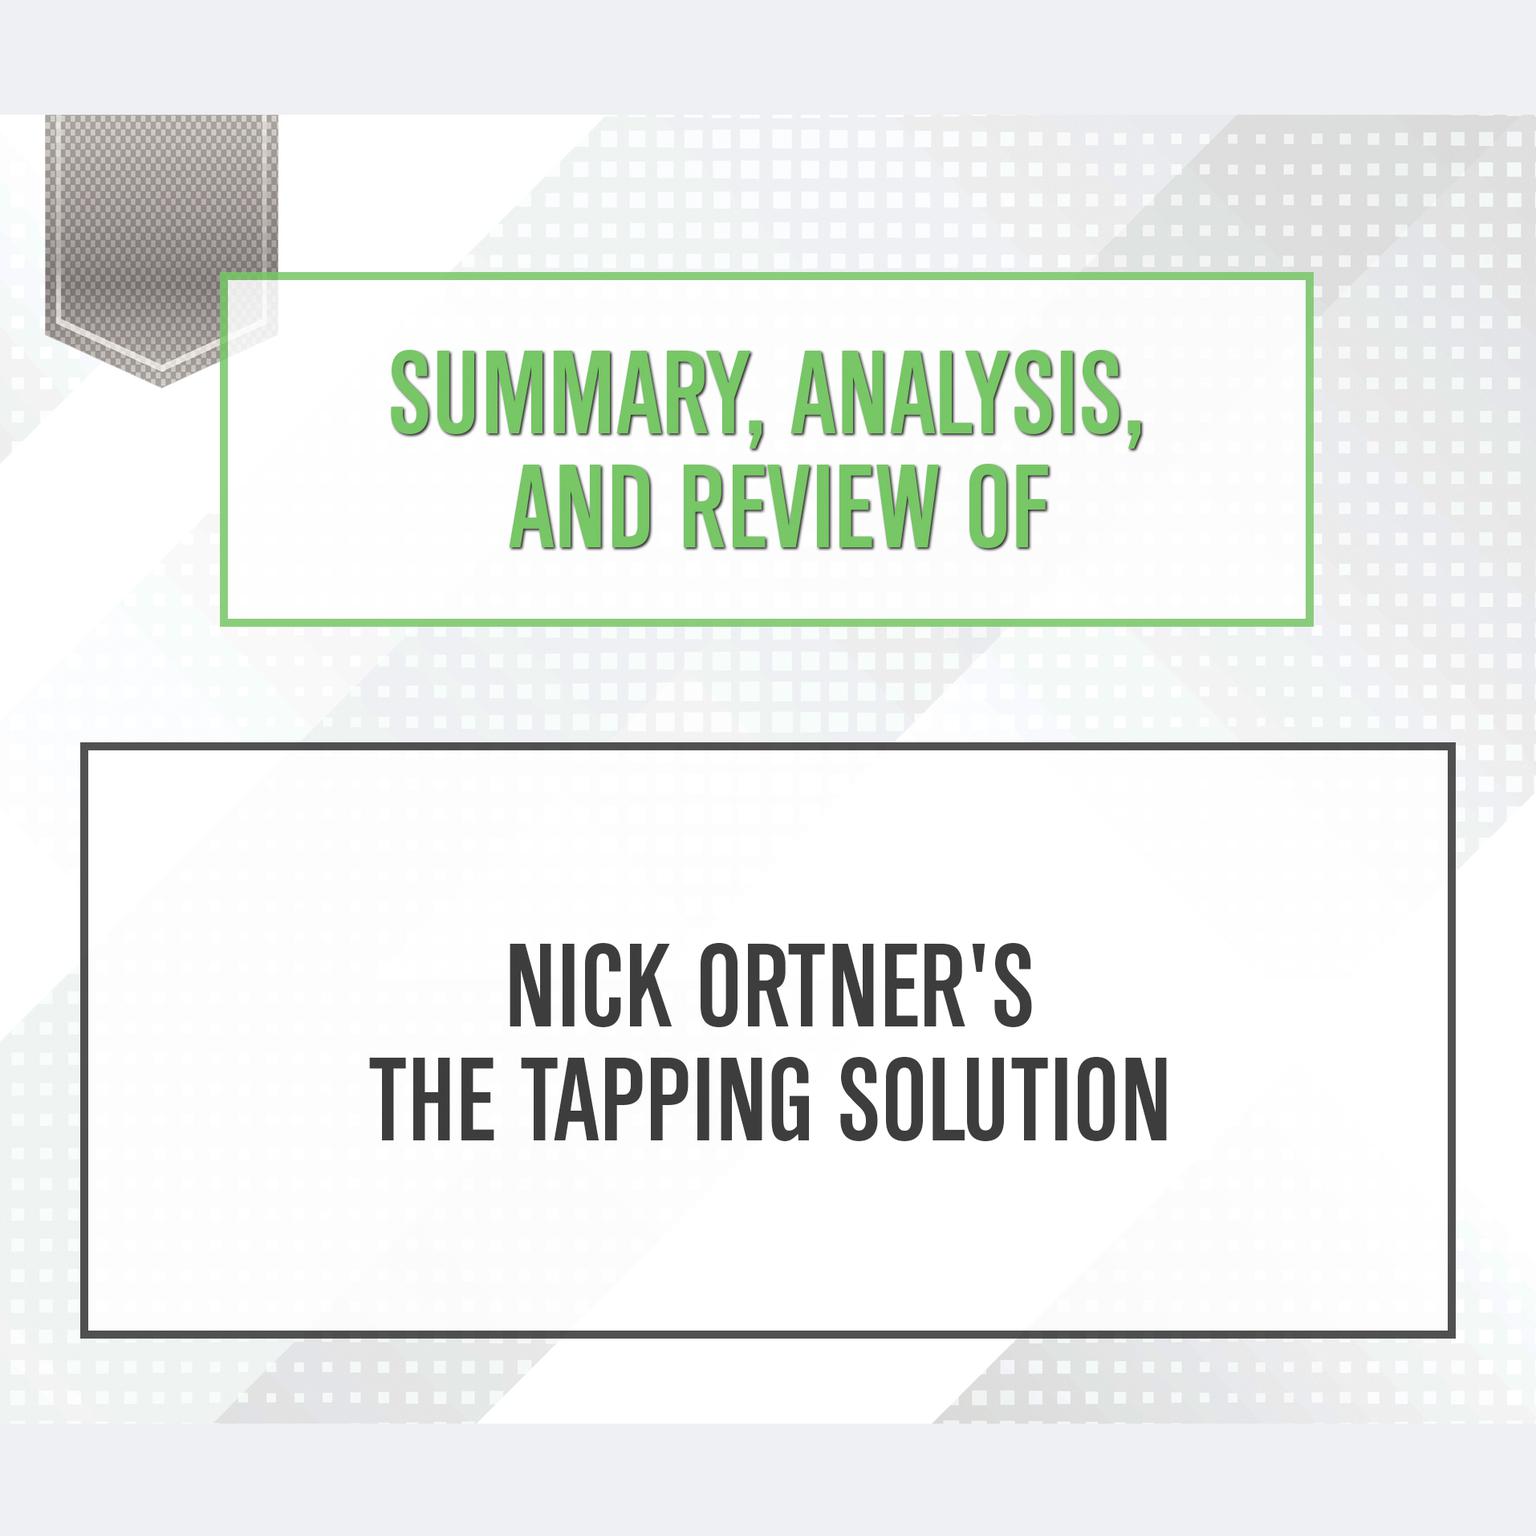 Summary, Analysis, and Review of Nick Ortners The Tapping Solution Audiobook, by Start Publishing Notes